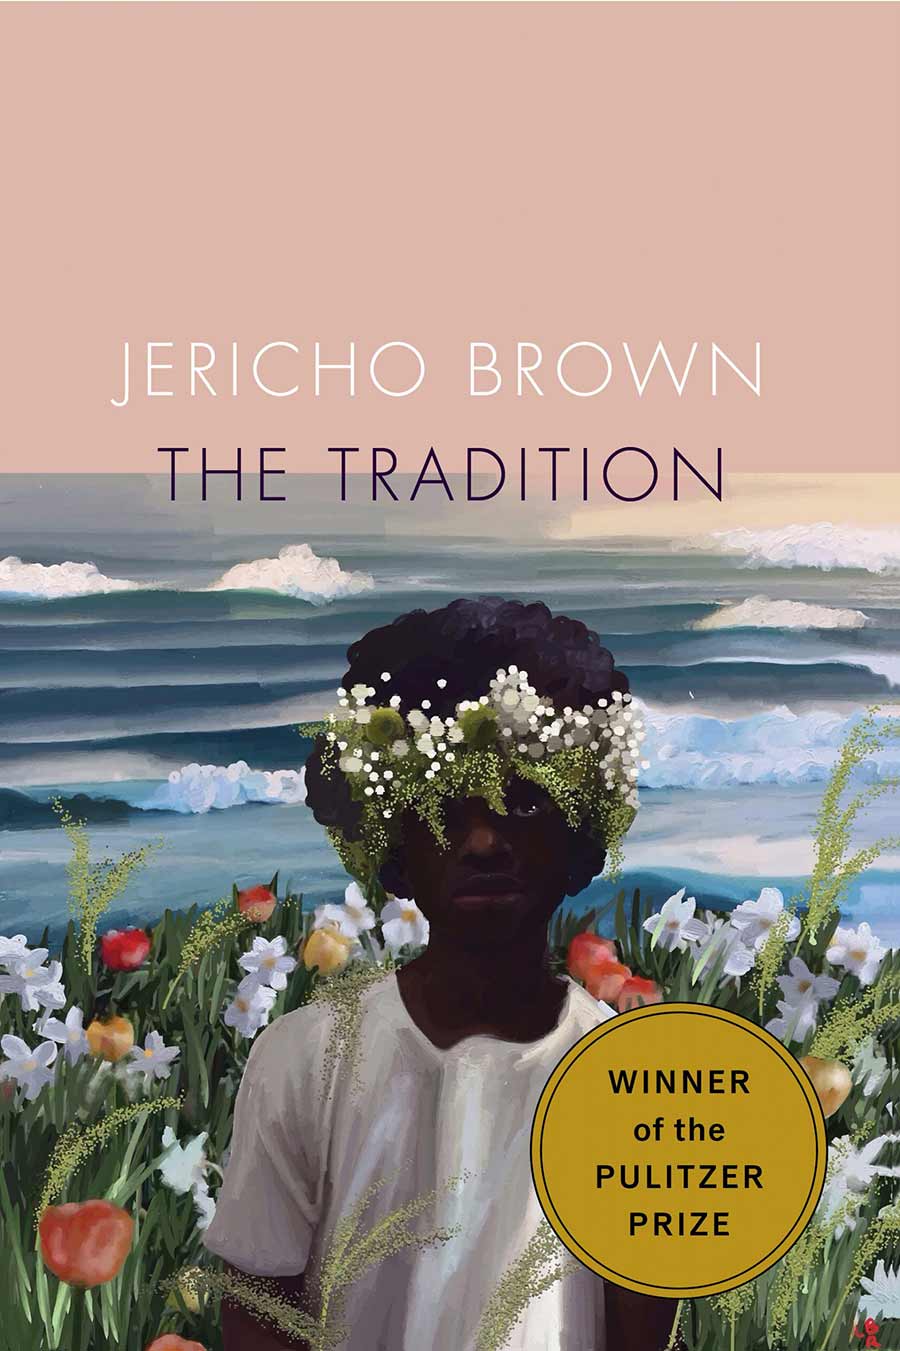 Cover of Jericho Brown's third book The Tradition.